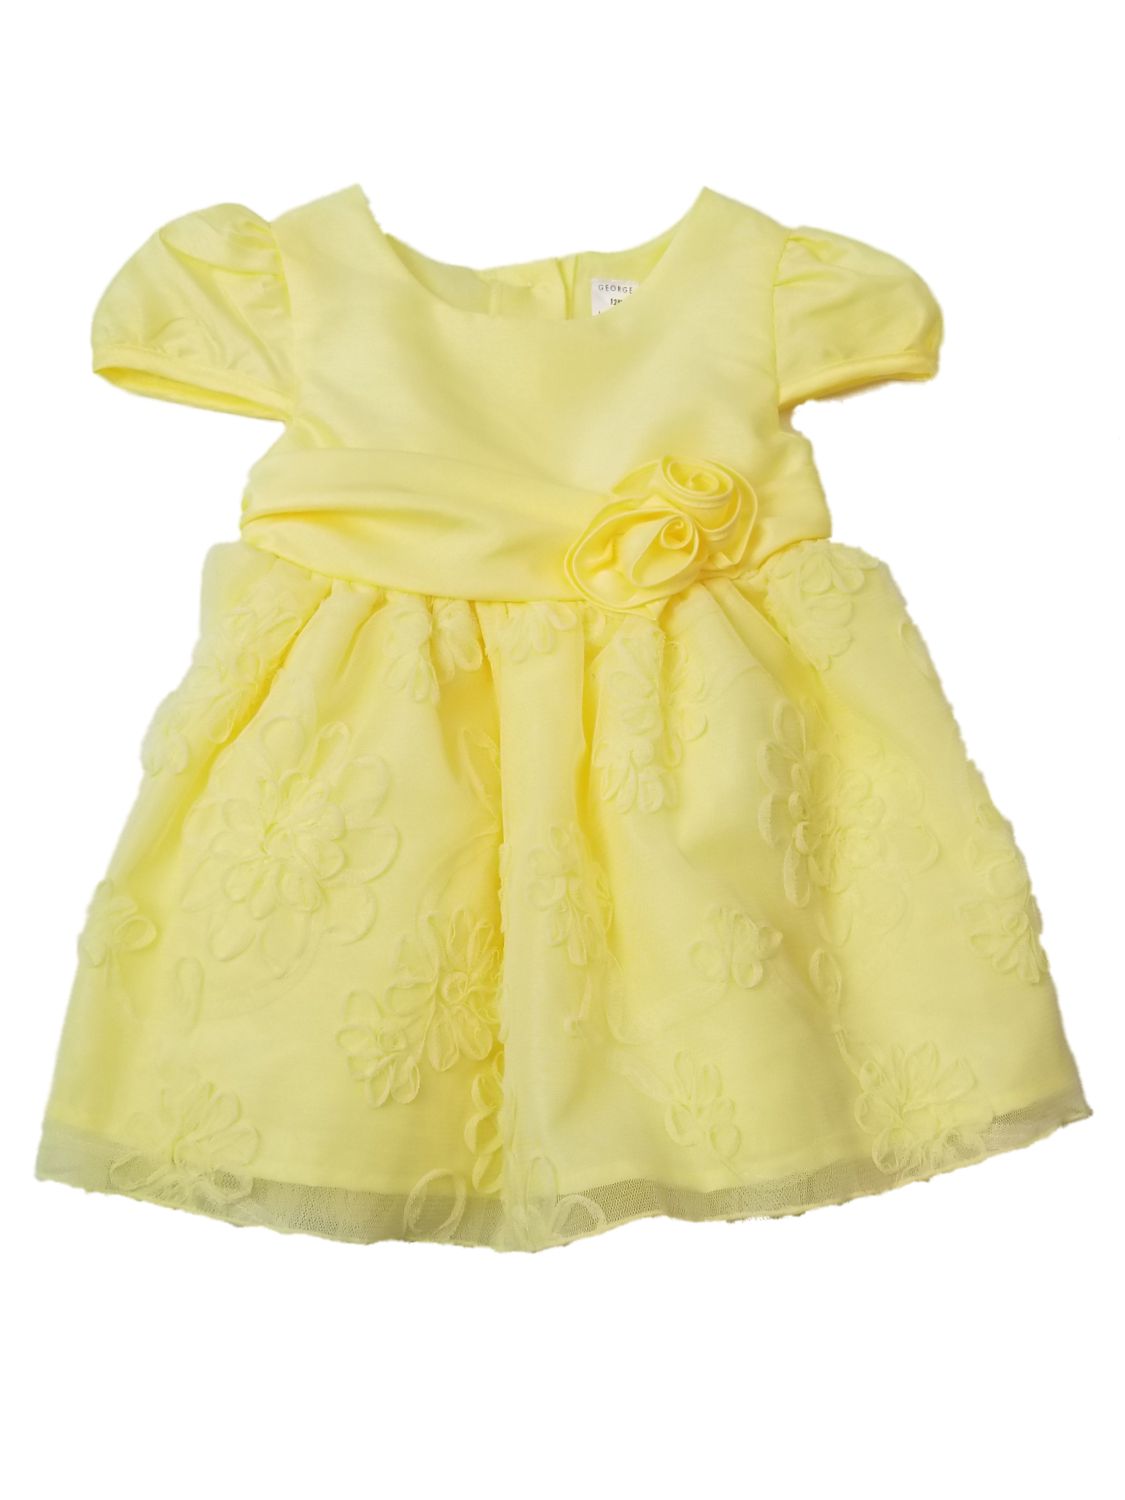 GEORGE Infant Baby Girls Yellow Rose Lace Easter Spring Holiday Party Dress 12M